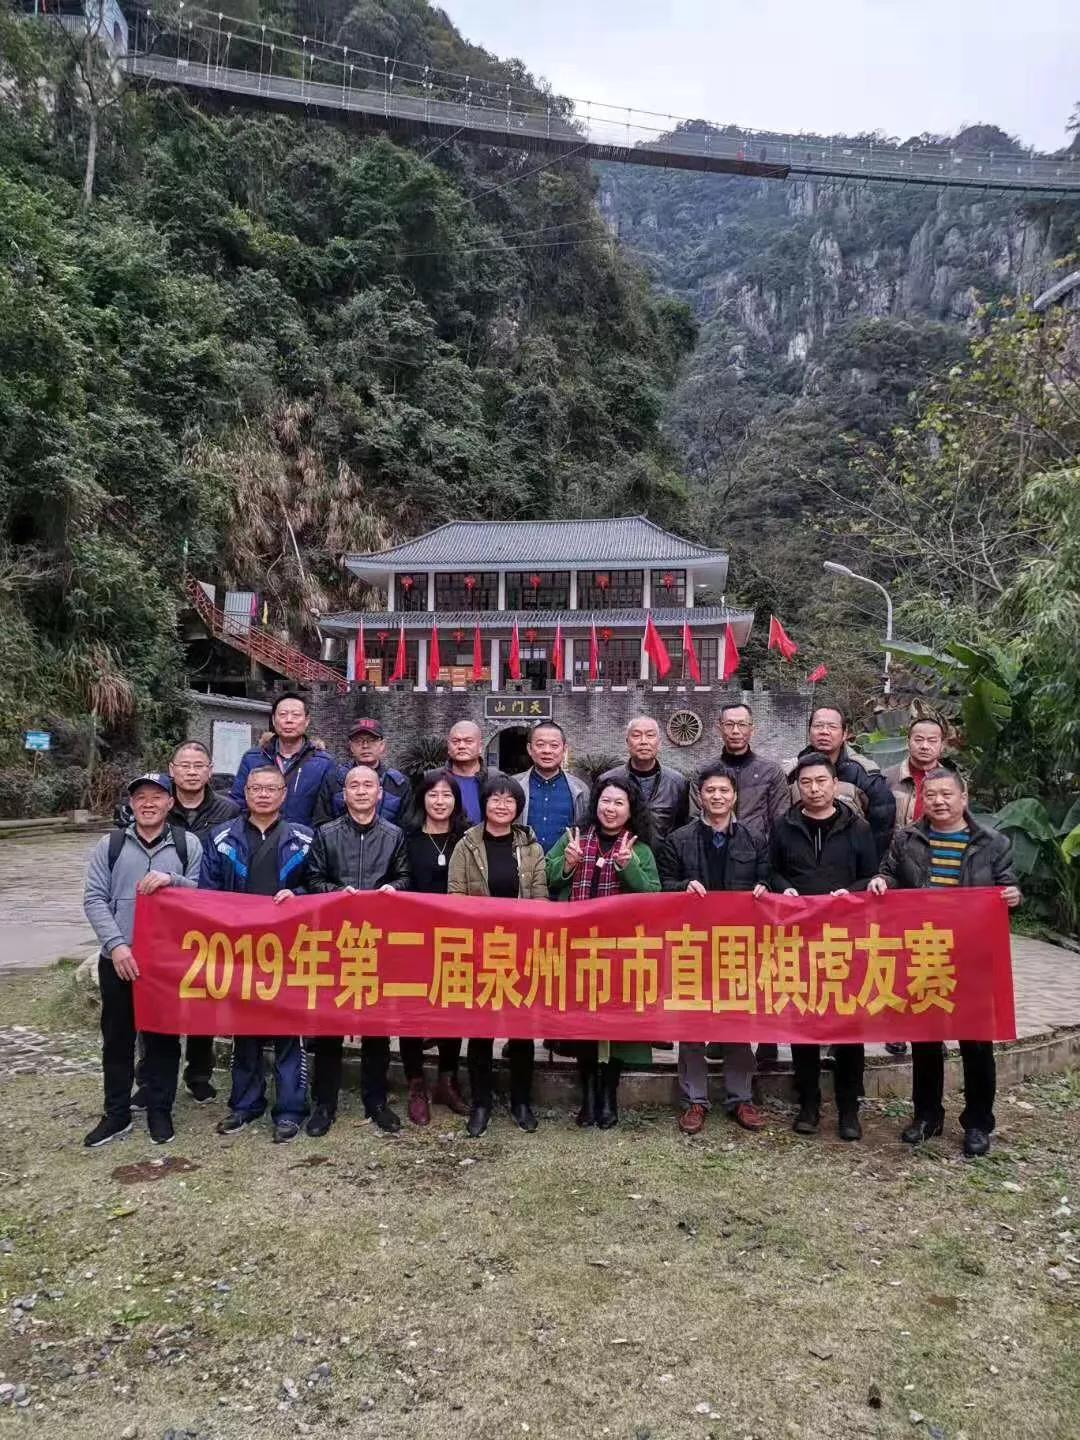 EBOSS | The 20th Quanzhou City Zhiwei Tiger Friendship Competition was successfully held in 2019!